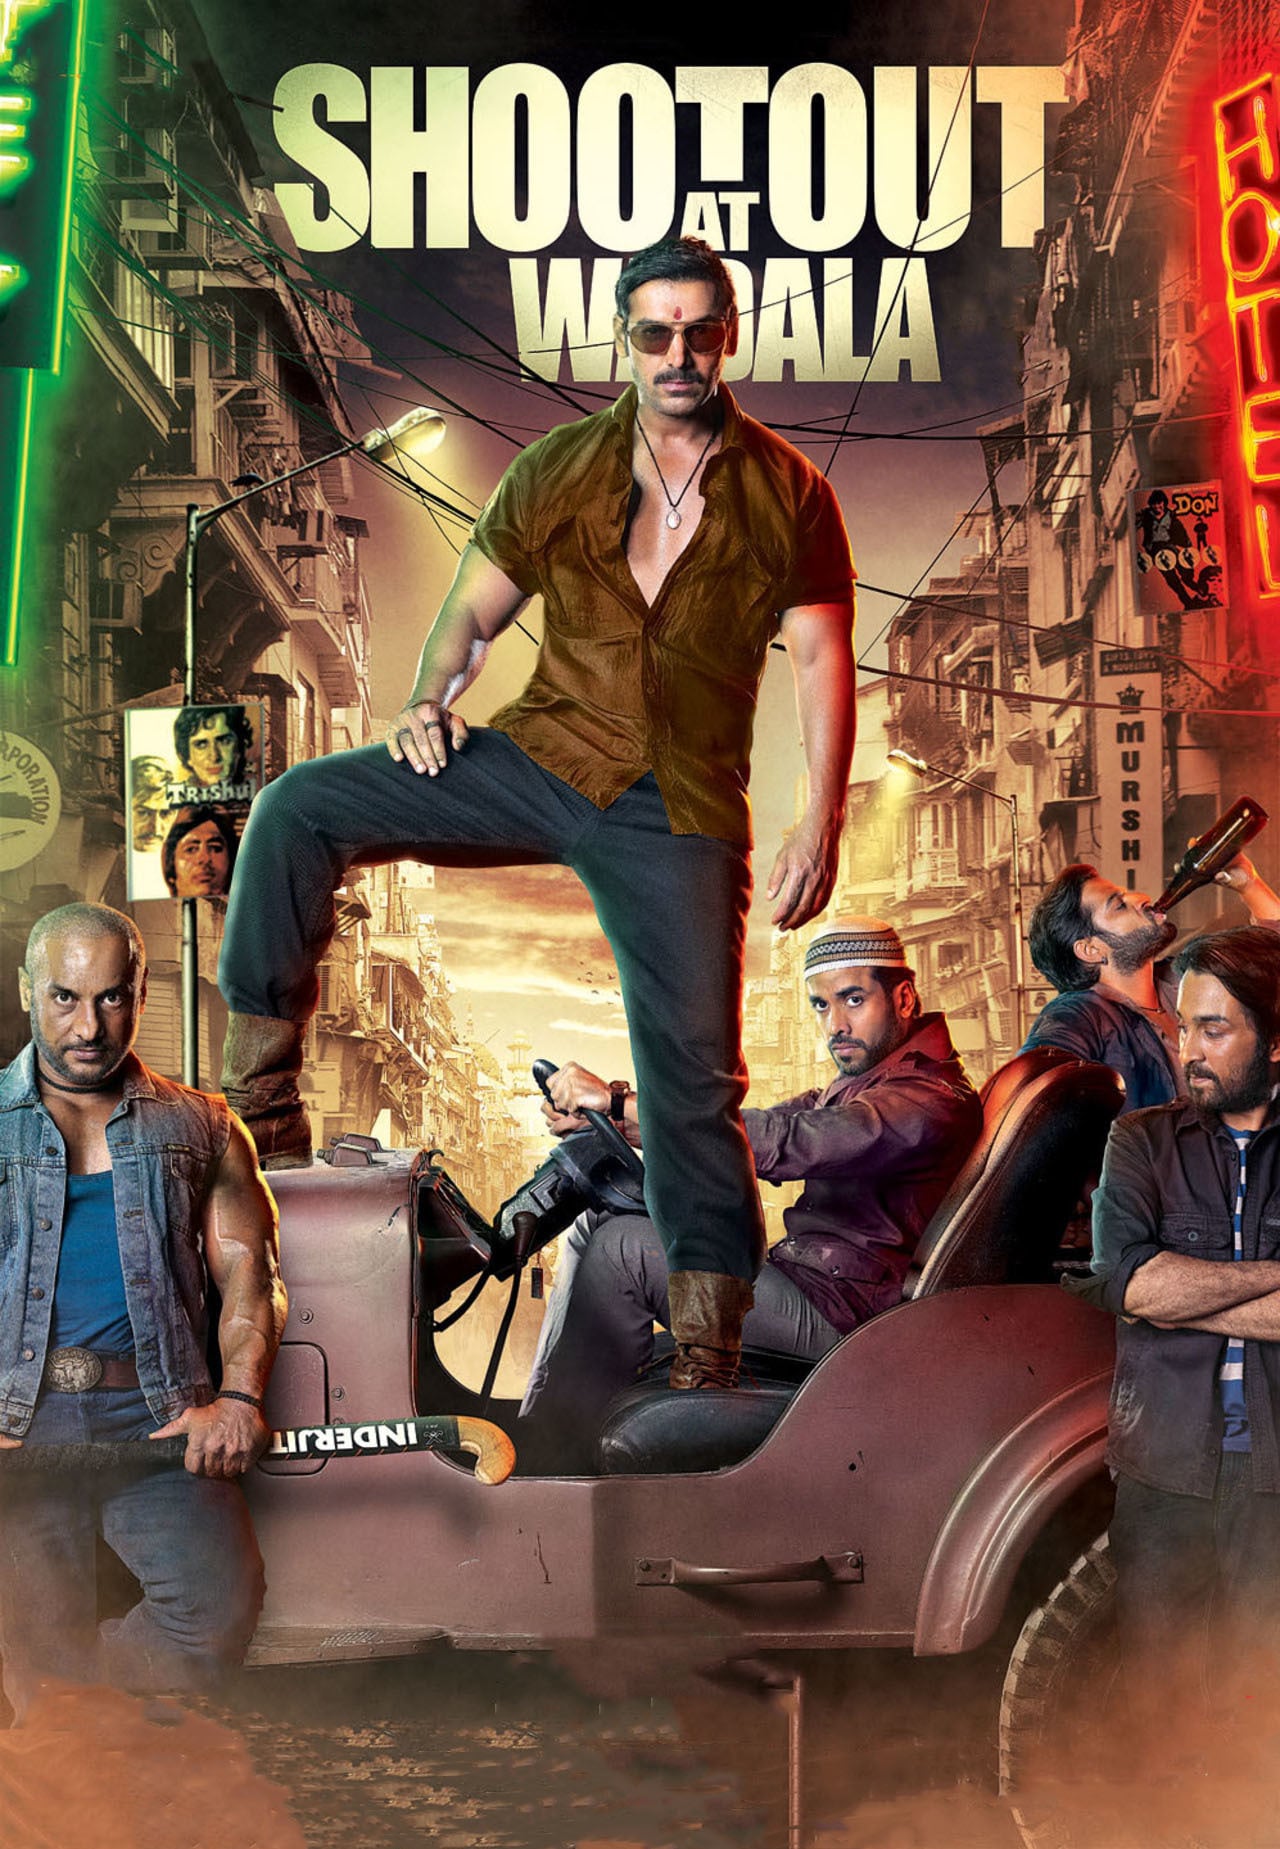 Poster for the movie "Shootout at Wadala"